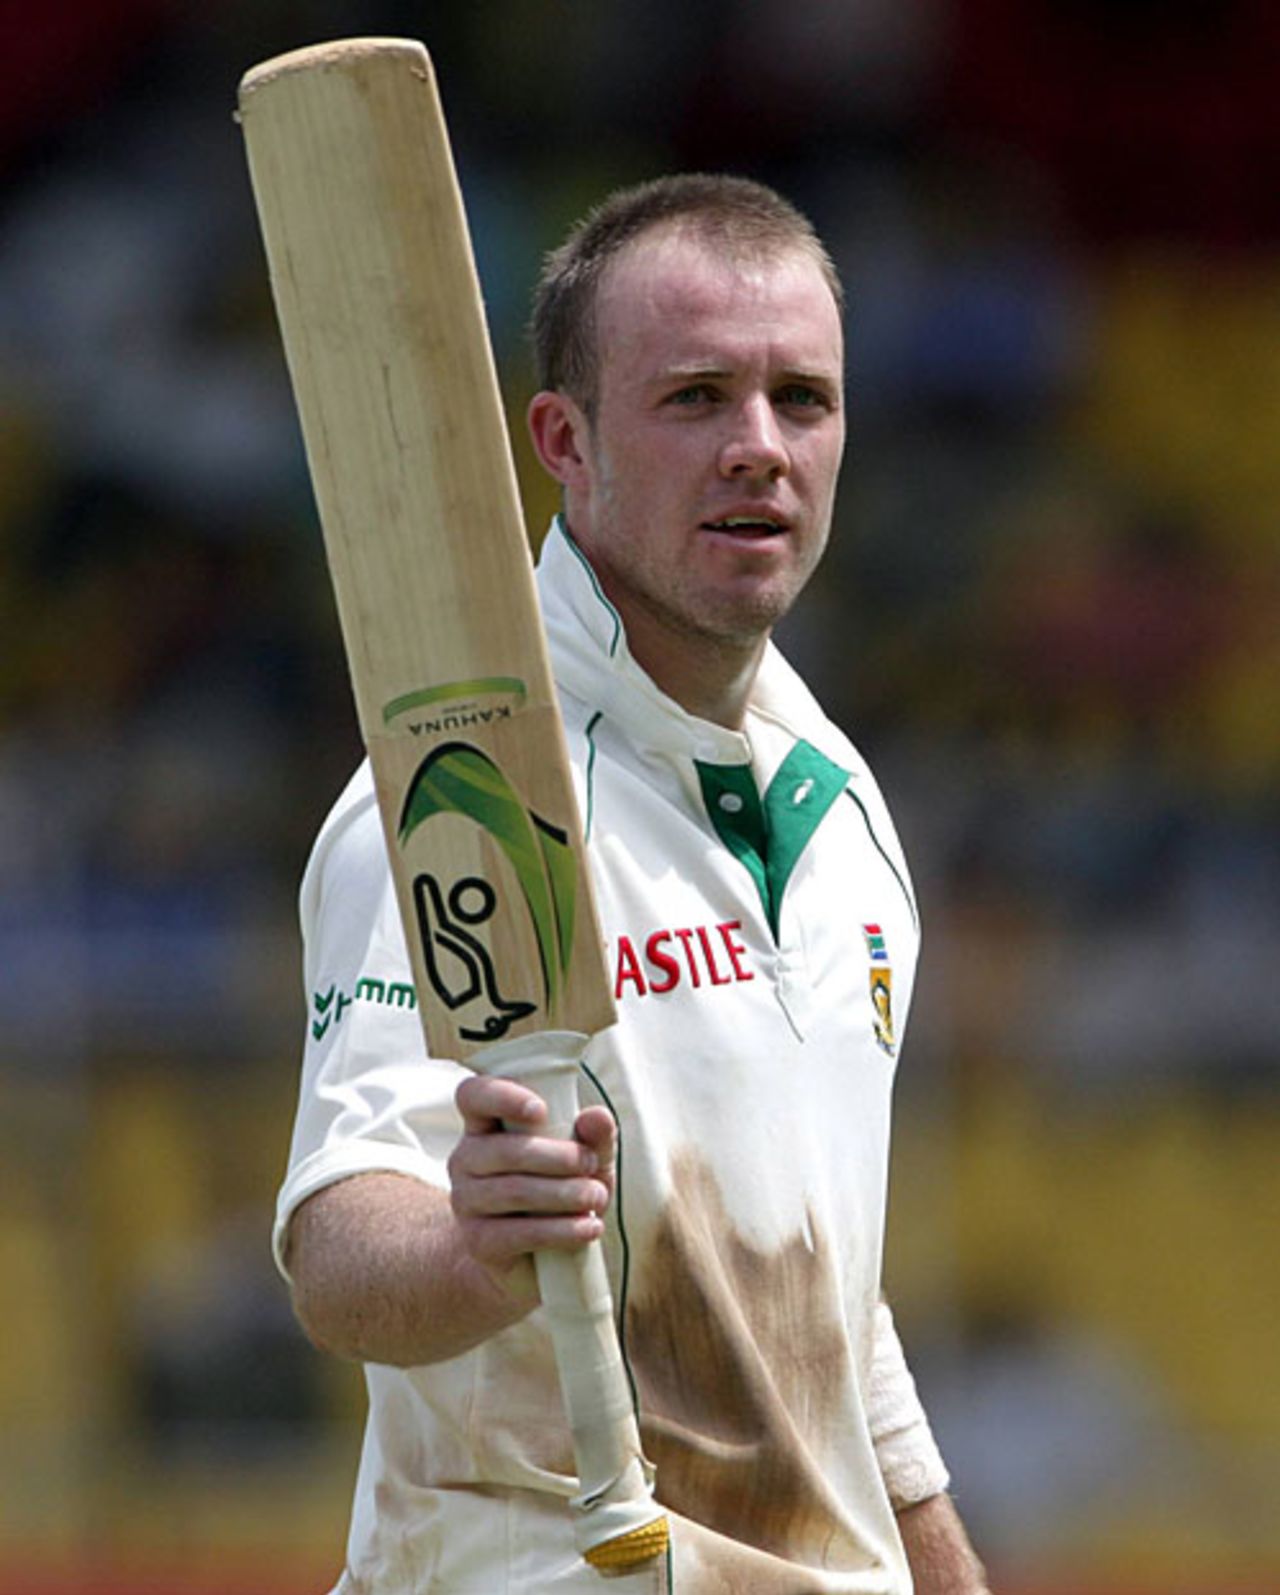 AB de Villiers reached his century in 174 balls, India v South Africa, 2nd Test, Ahmedabad, 2nd day, April 4, 2008